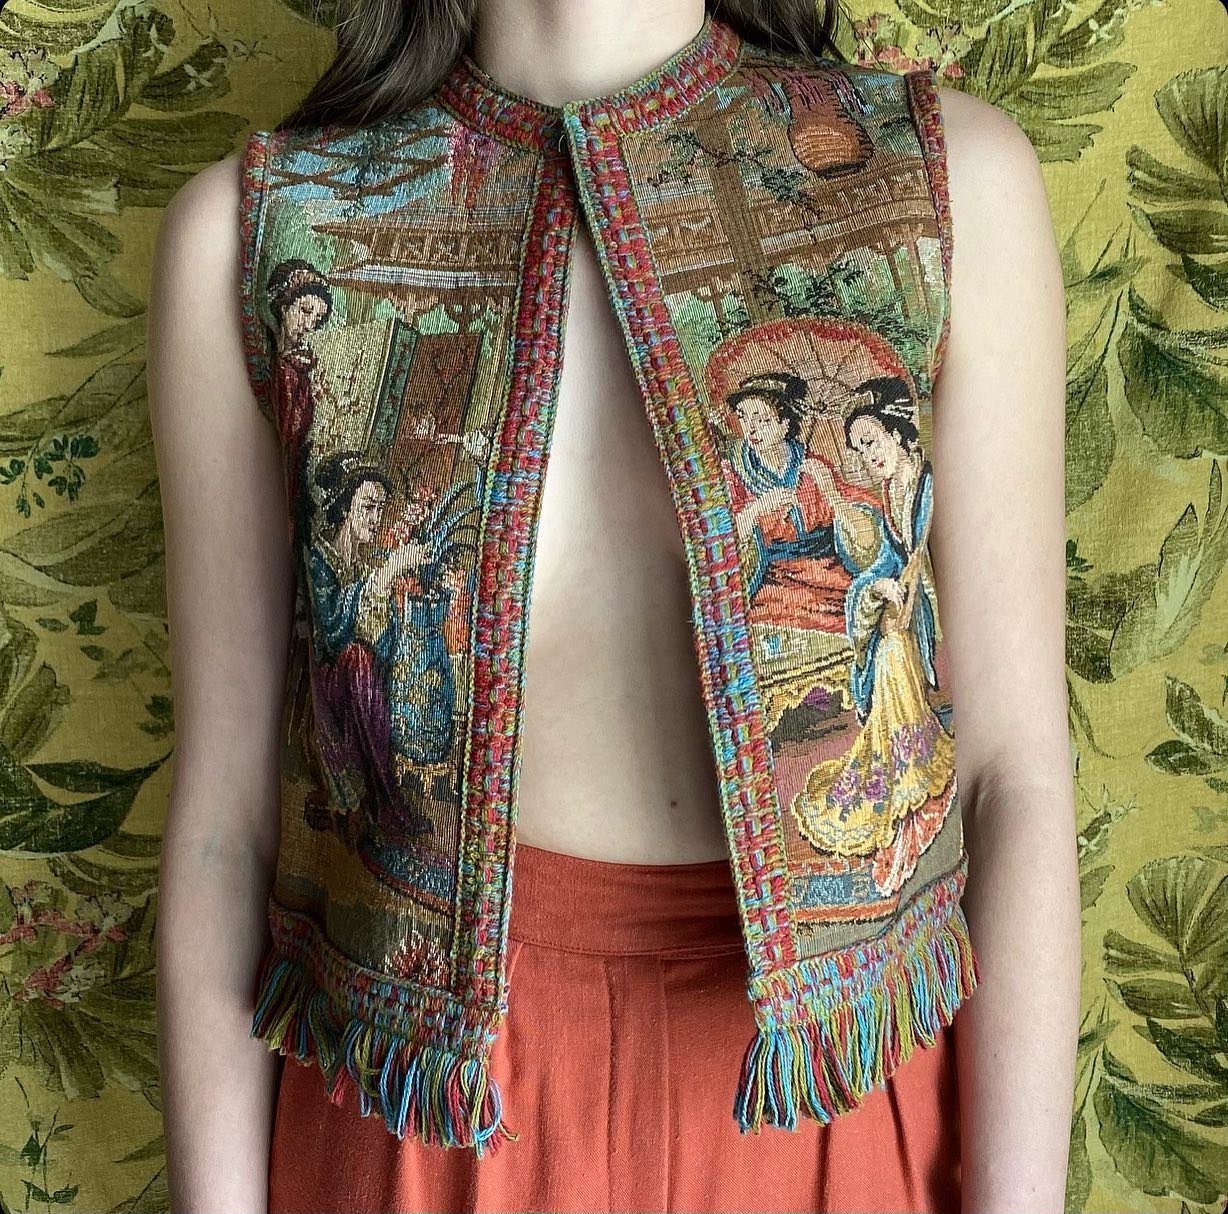 Lovely vintage tapestry vest coming to the @baltimorevintageexpo IN LESS THAN A MONTH😱
SHOP IS OPEN TODAY 12-6 &amp; WE&rsquo;RE ALSO POPPING UP AT @monumentcitybrewing 👑COME OUT, BALTIMORE!
#baltimorevintageexpo #baltimorevintage #milkandice #vint